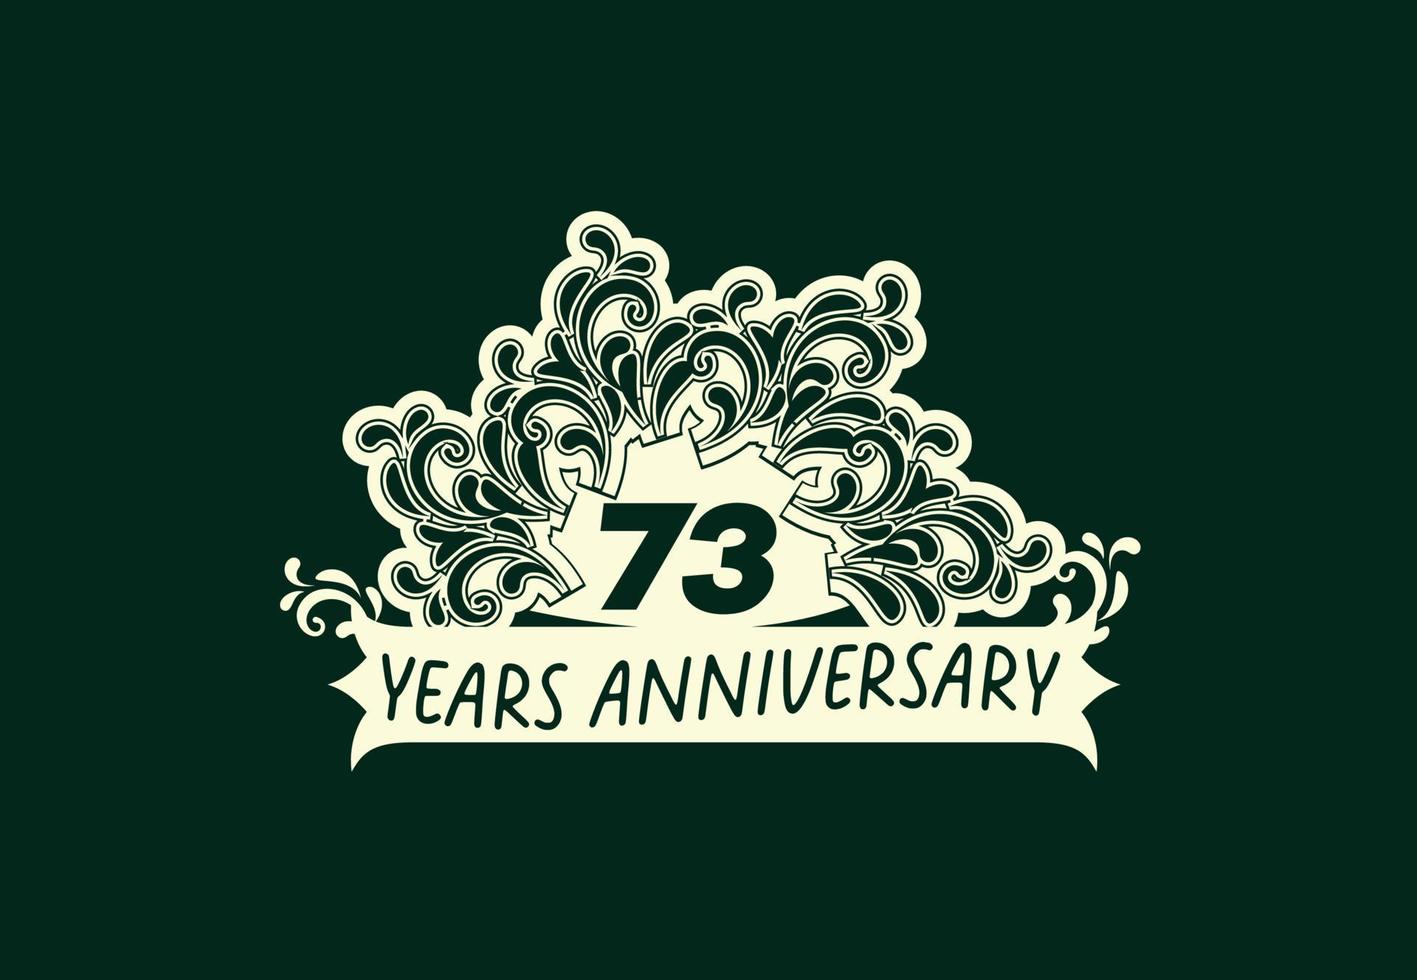 73 years anniversary logo and sticker design template vector